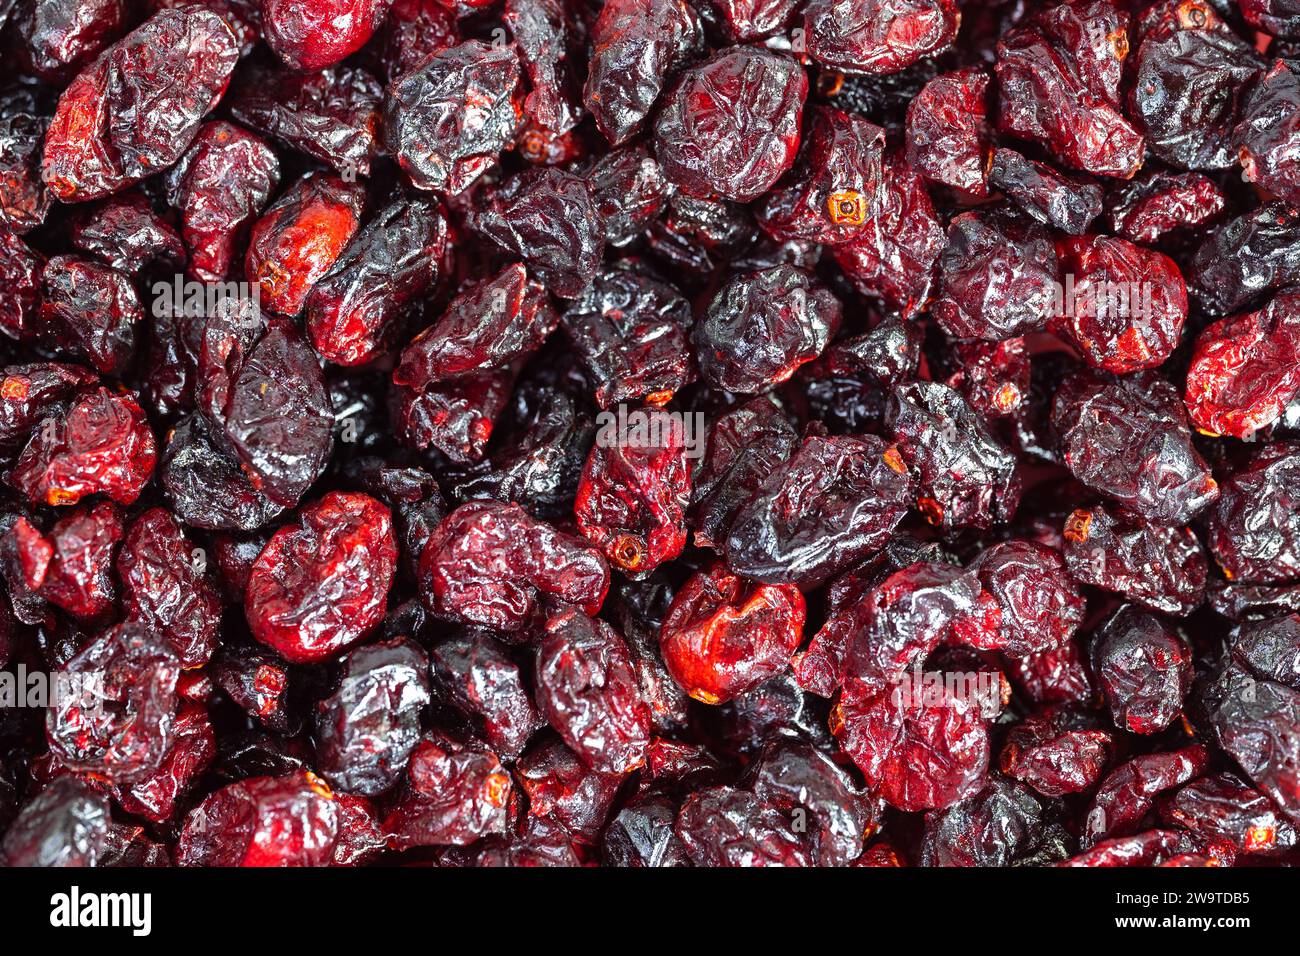 Dried cranberries in a close-up Stock Photo